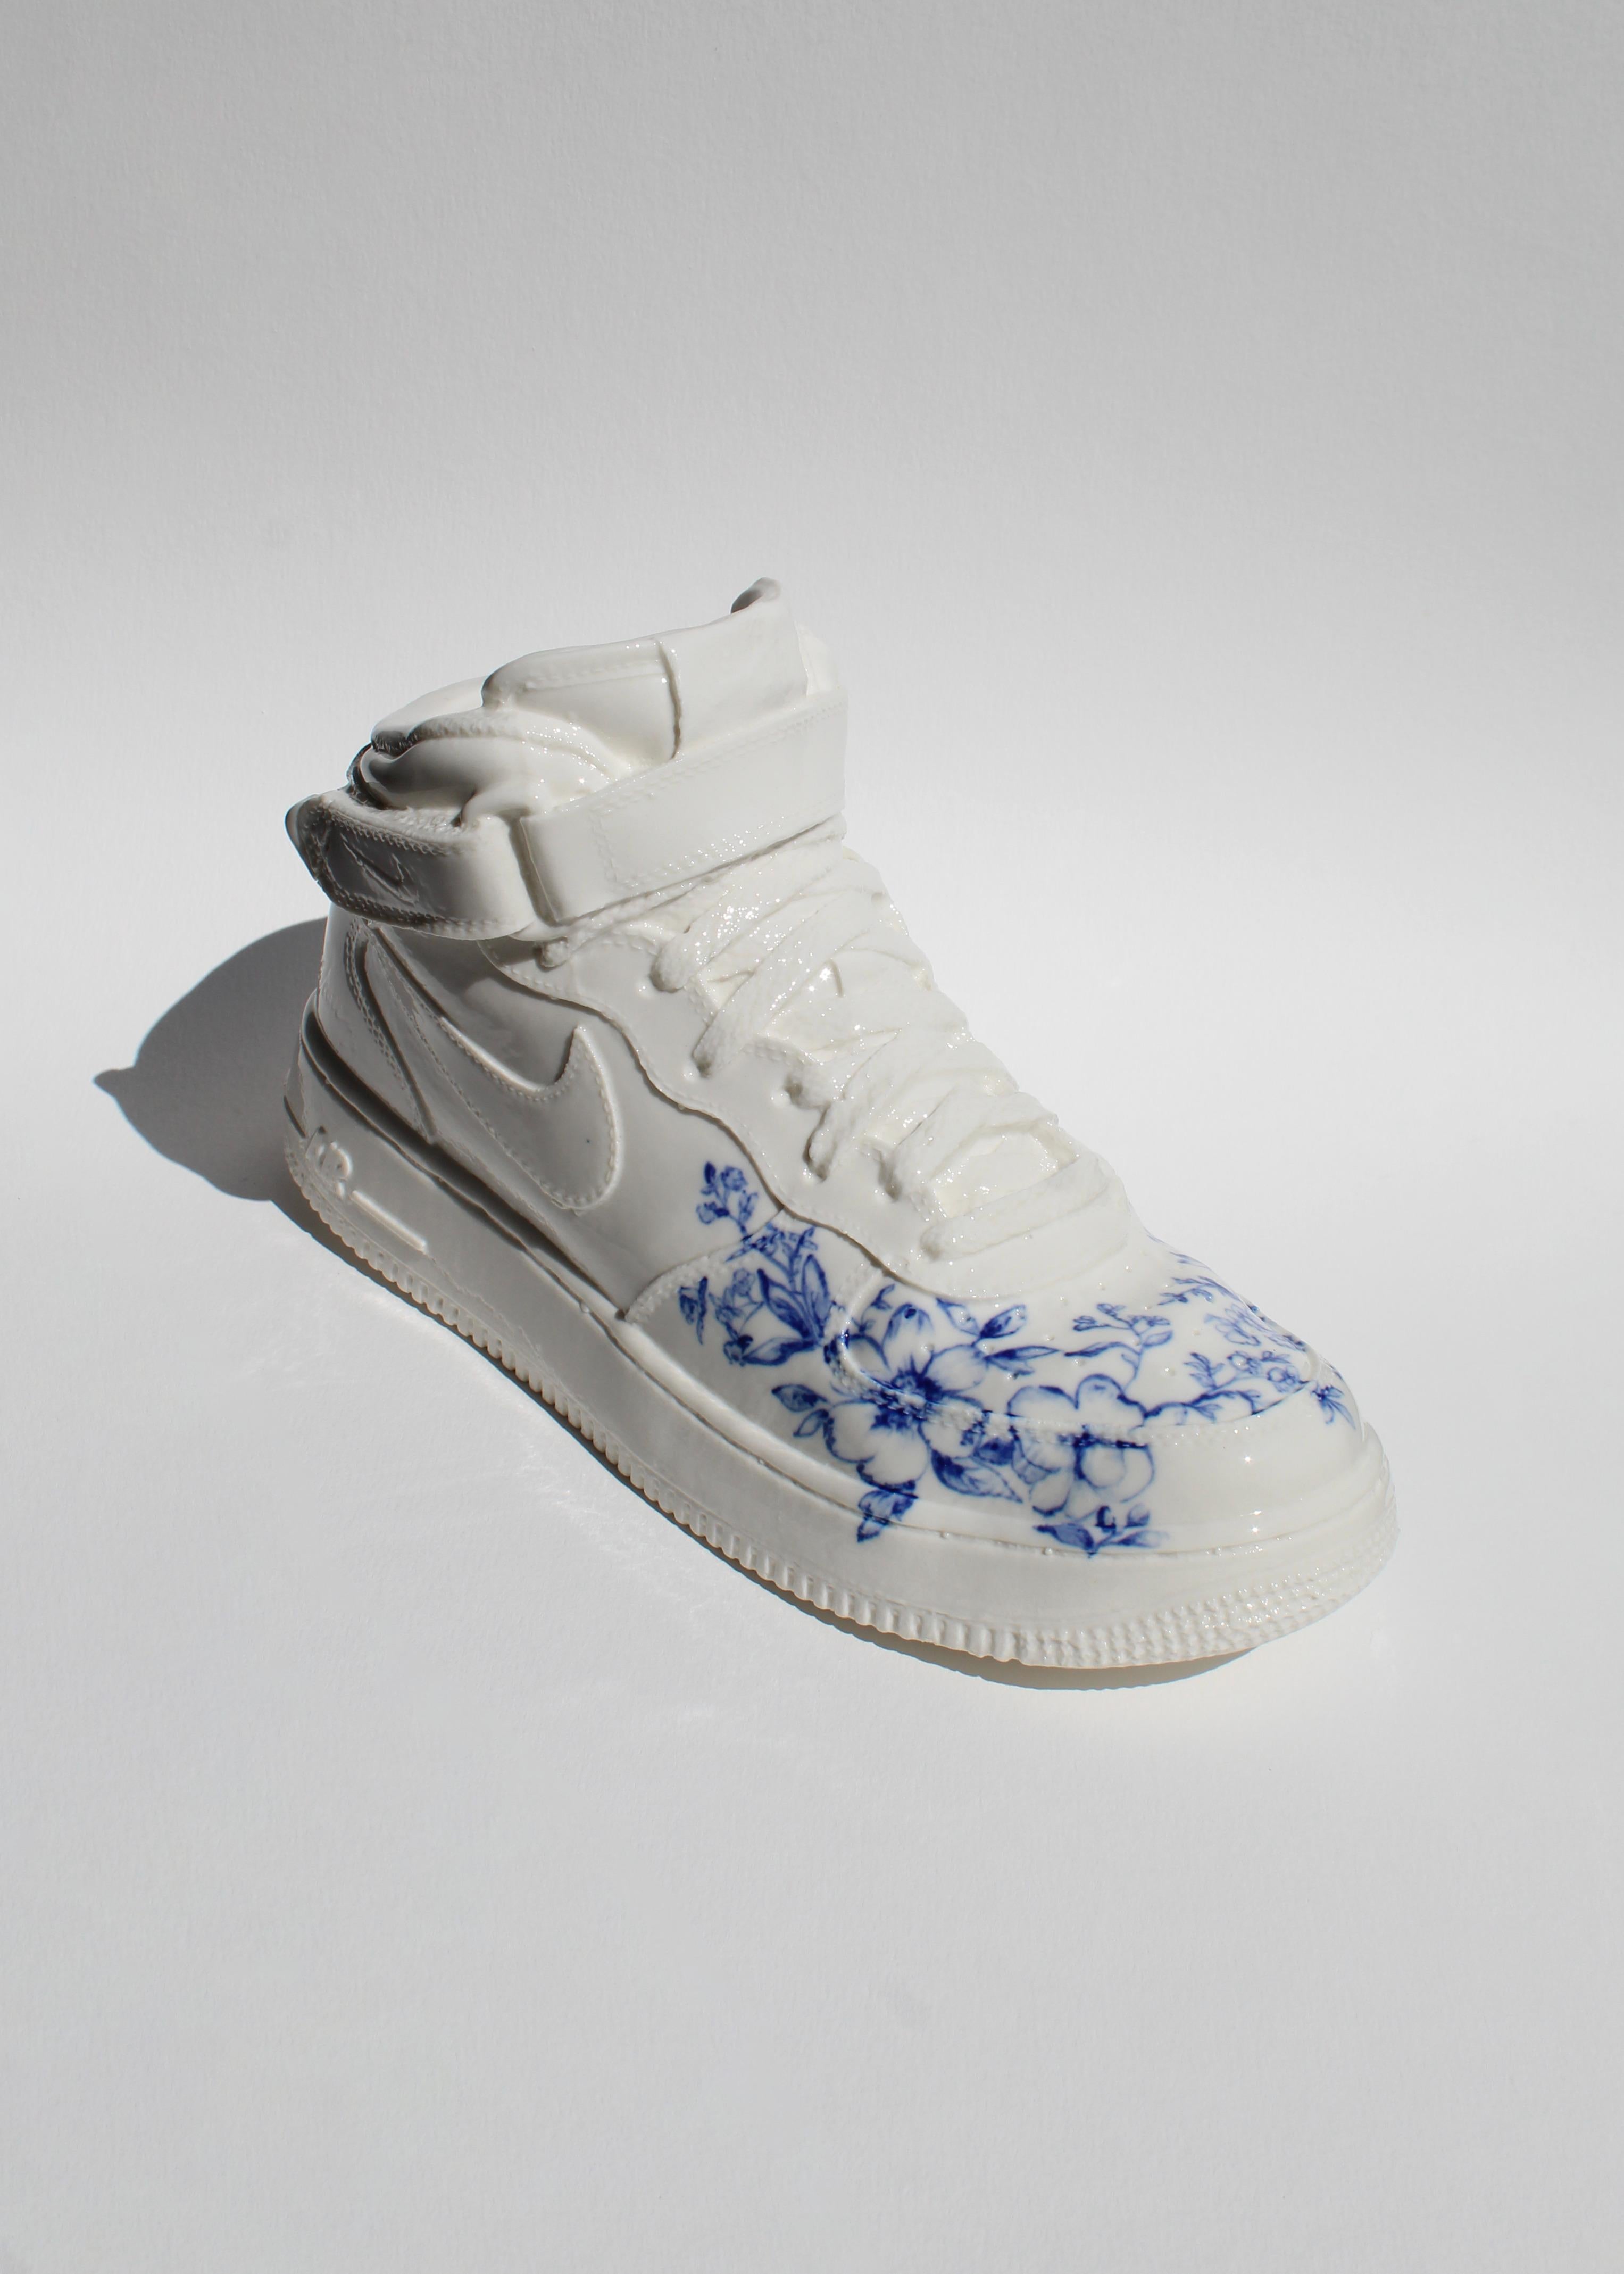 Sculpture Artwork Nike Air Porcelain hand painted by French Artist Maxime Siau  For Sale 2